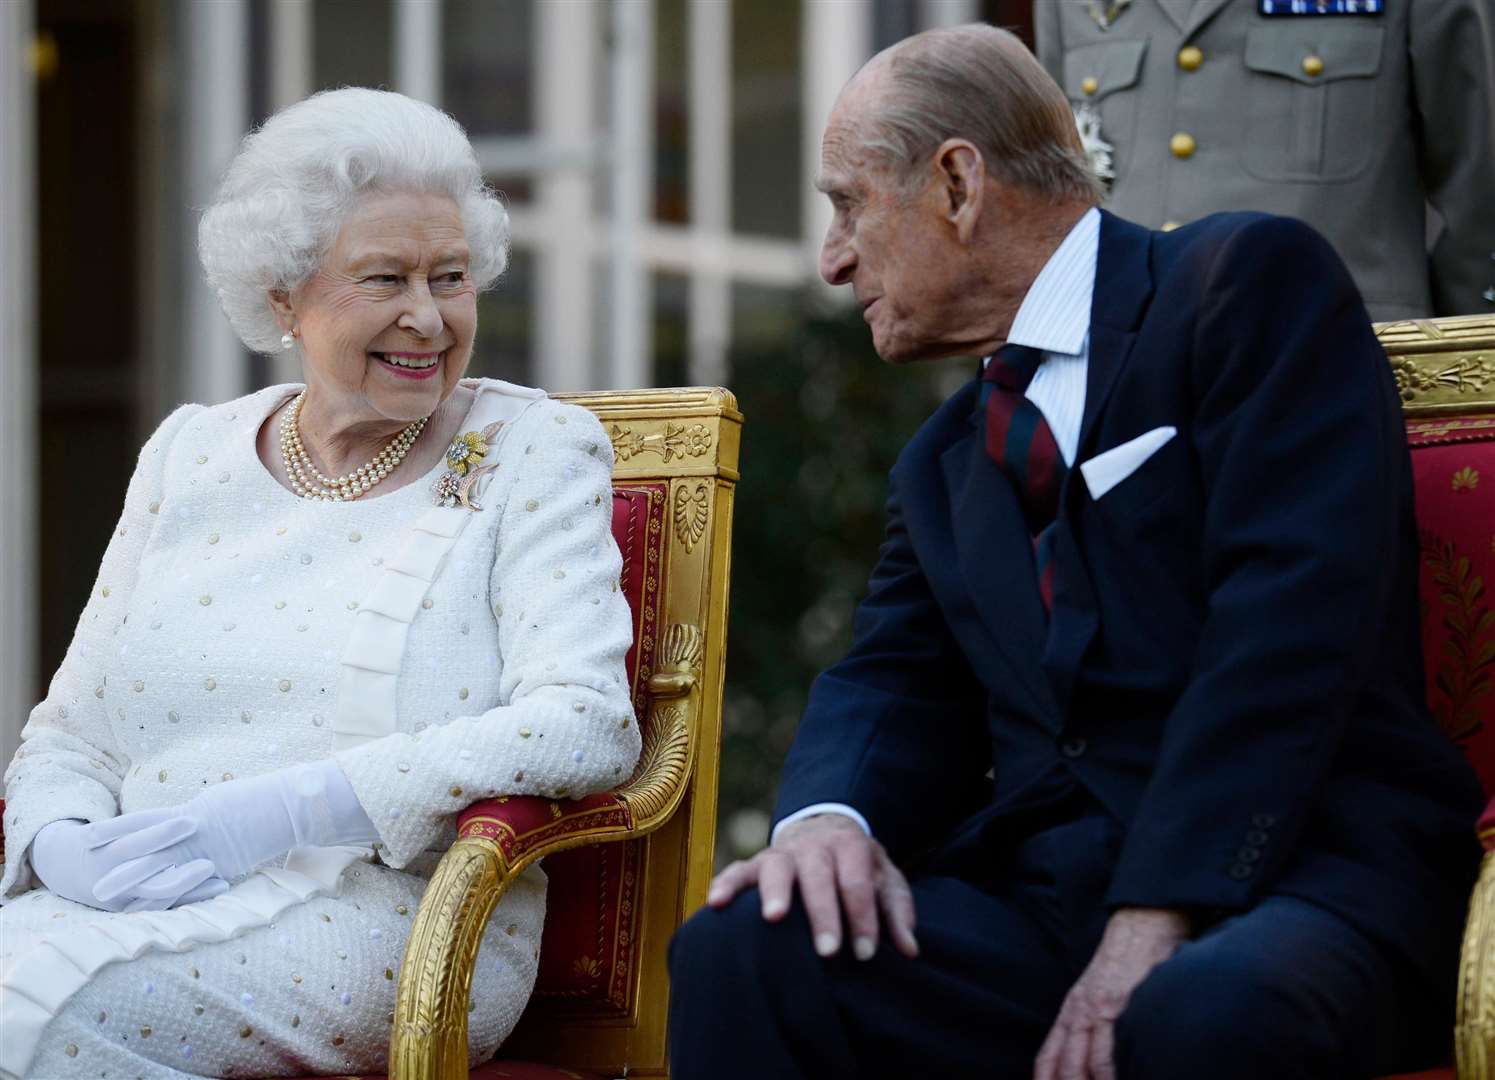 The King stated: 'To my darling Mama - as you begin your last great journey to join my dear late Papa - I want simply to say this, thank you'. Picture: Owen Humphreys/PA